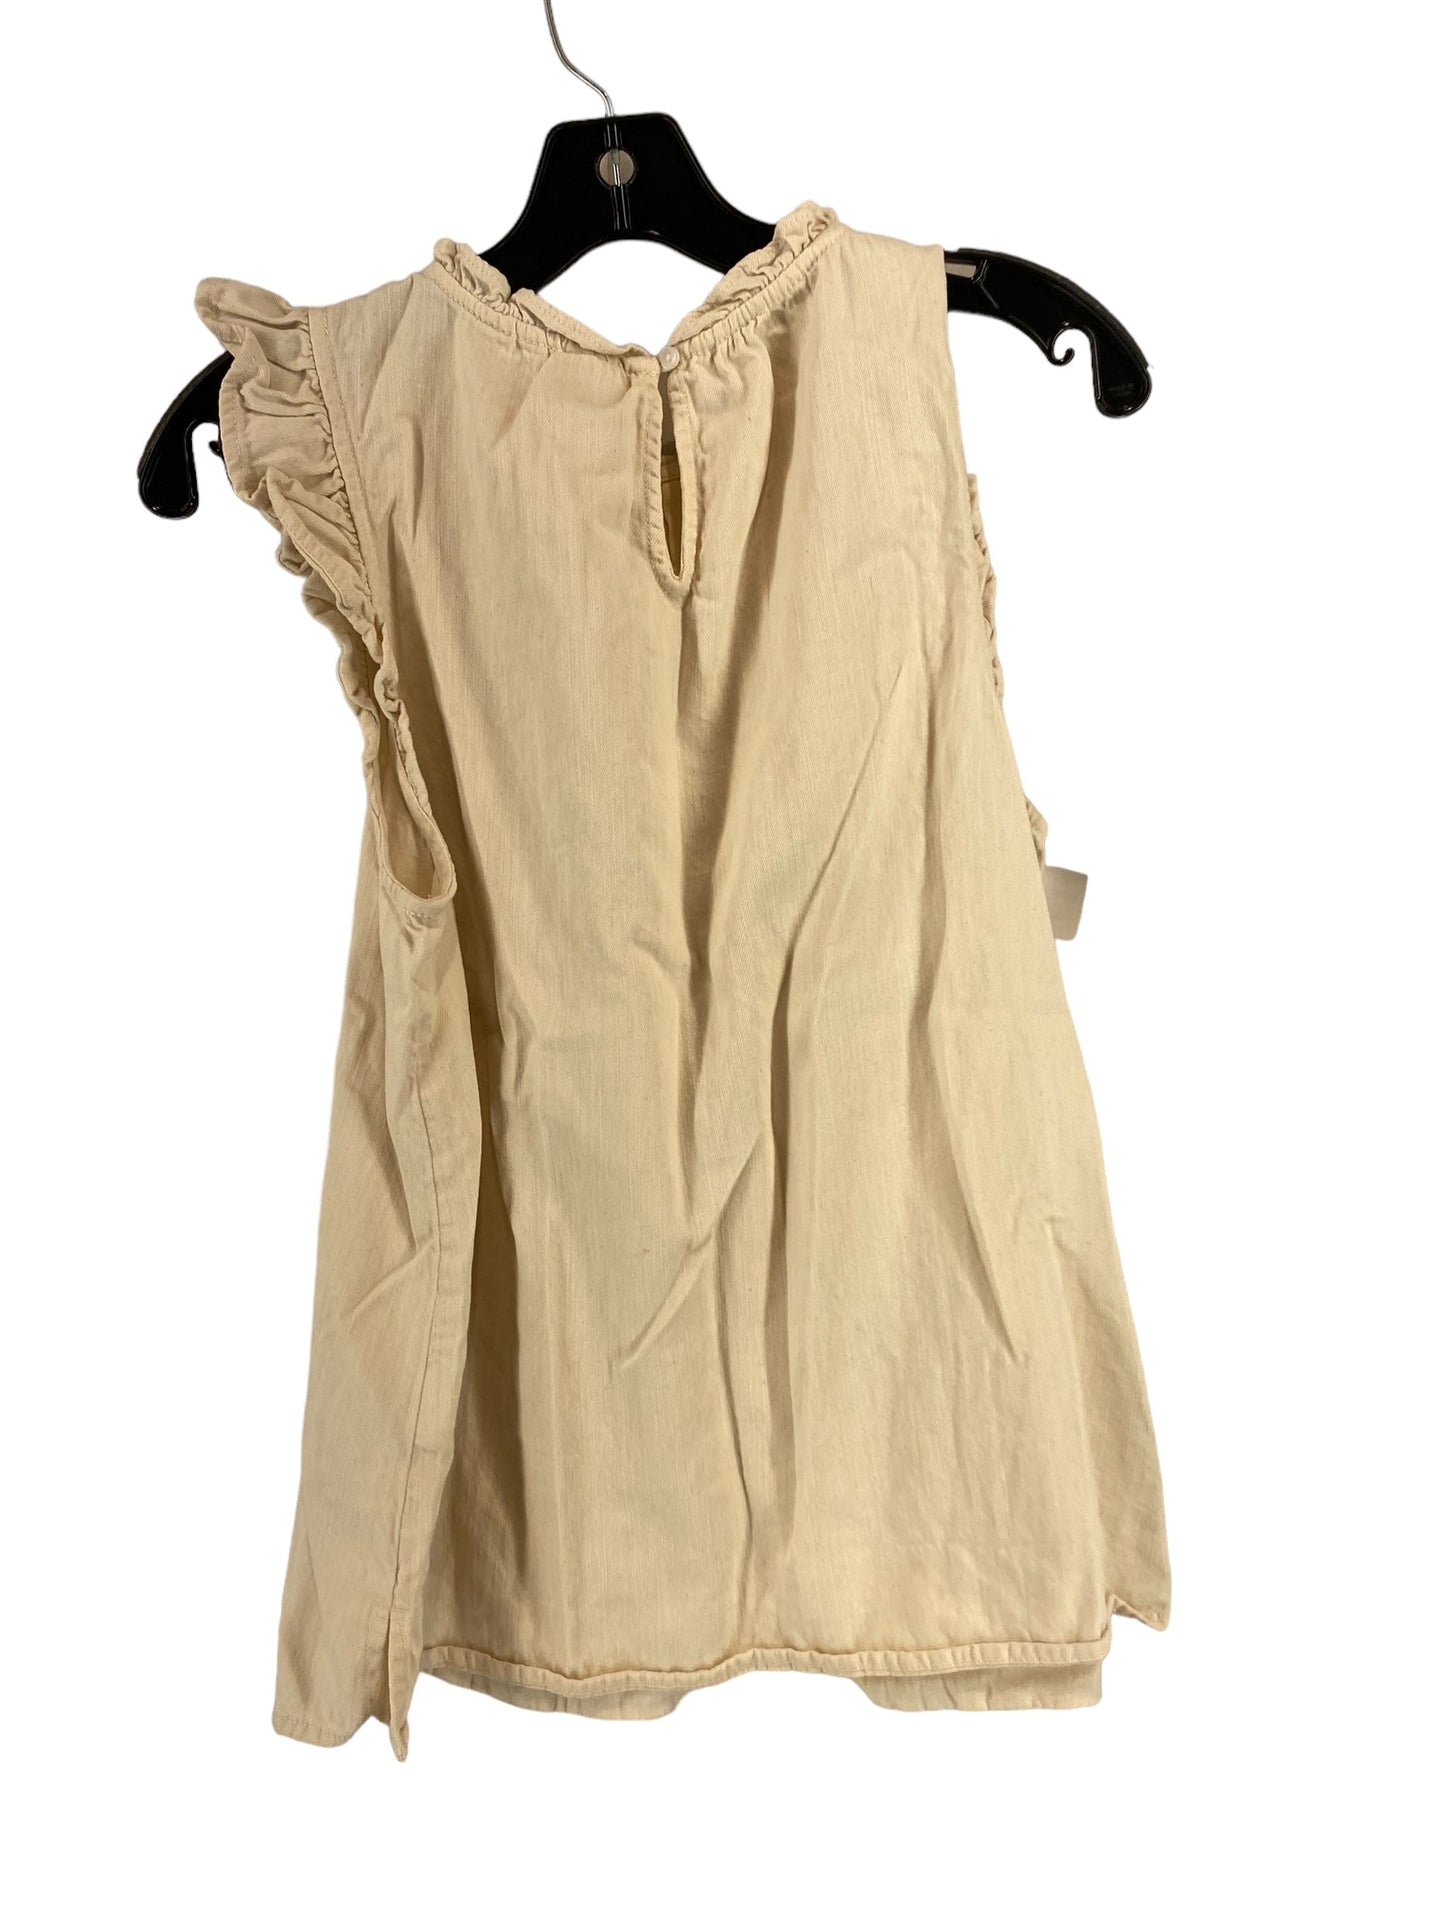 Beige Top Sleeveless Old Navy, Size M